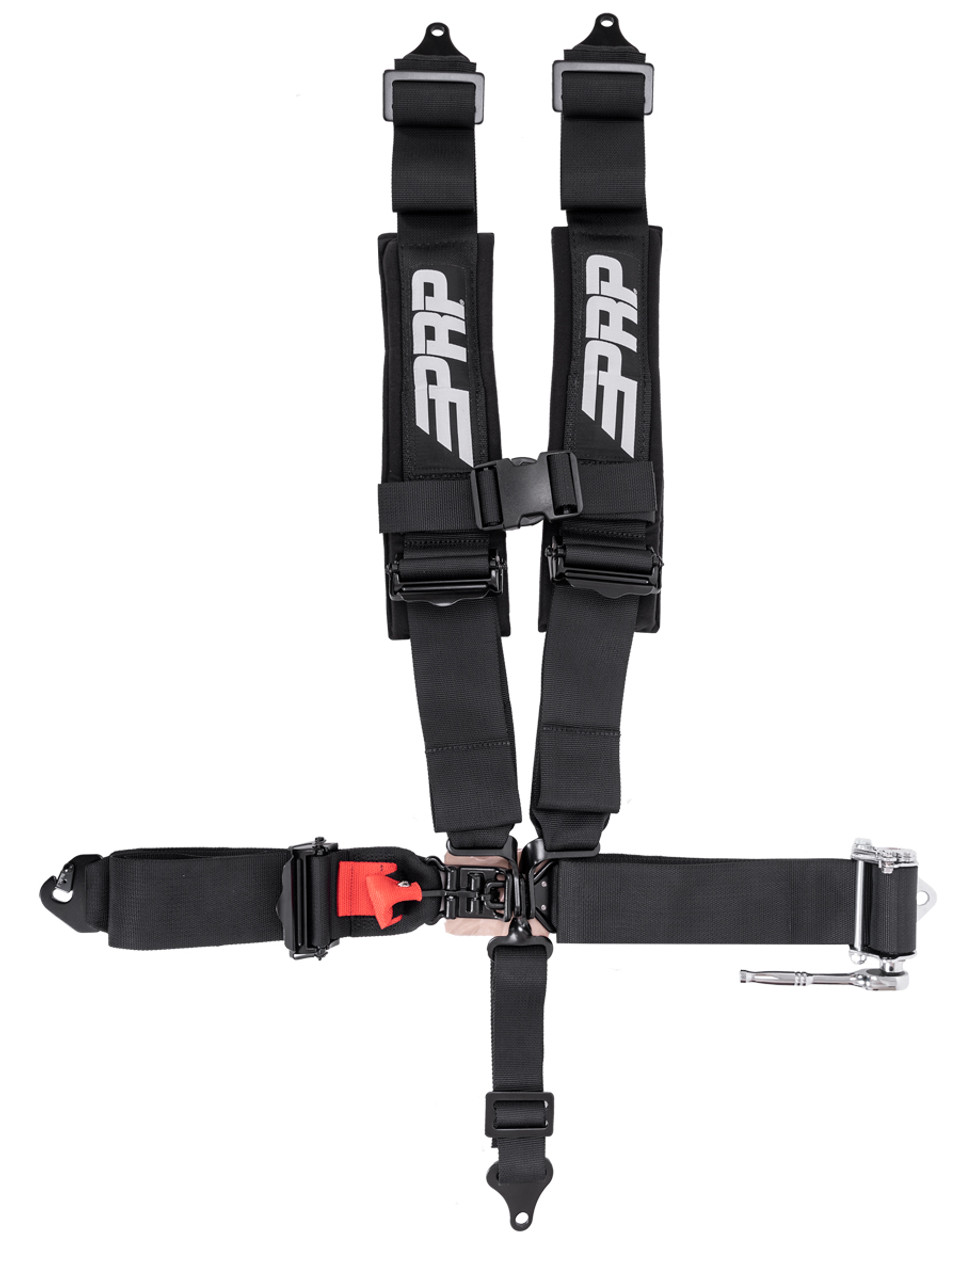 5.3 Harness - 5 point harness, 3" belts; lap belt: Ratcheting, clip-in, pull-up, EZ adjusters